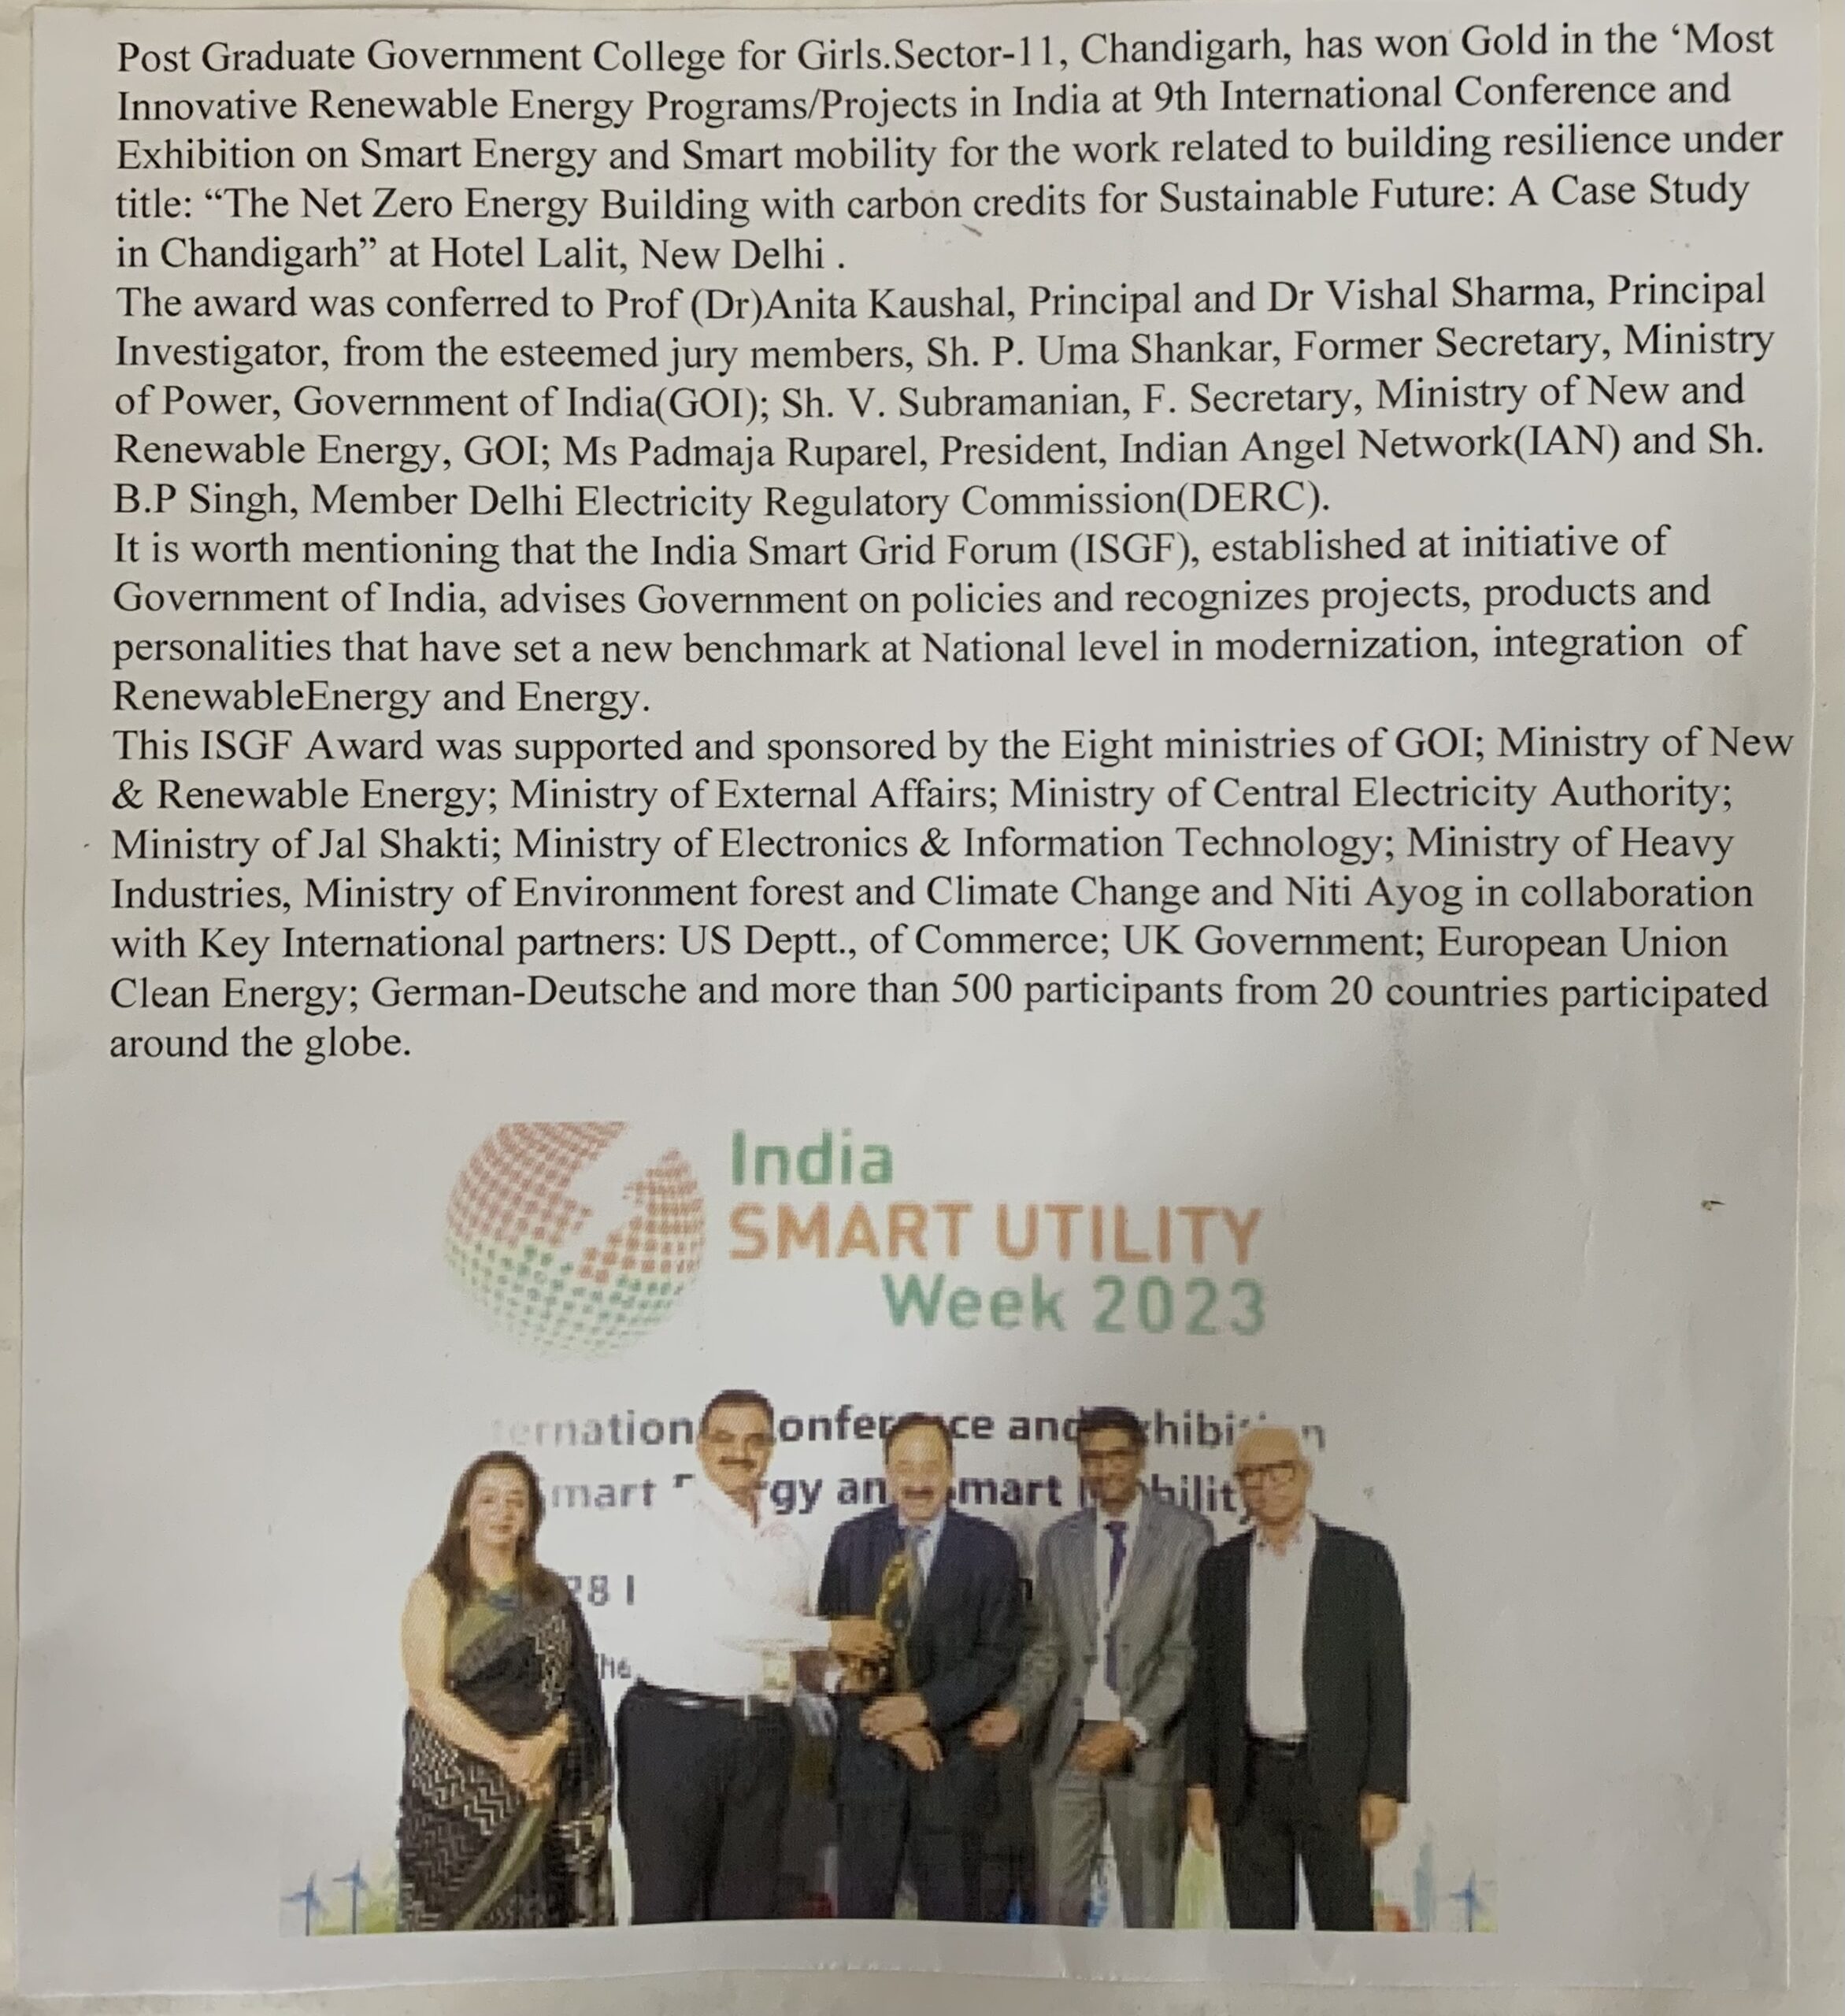 PGGCG-11 has won Gold in the ‘Most Innovative Renewable Energy Programs/Projects in India’